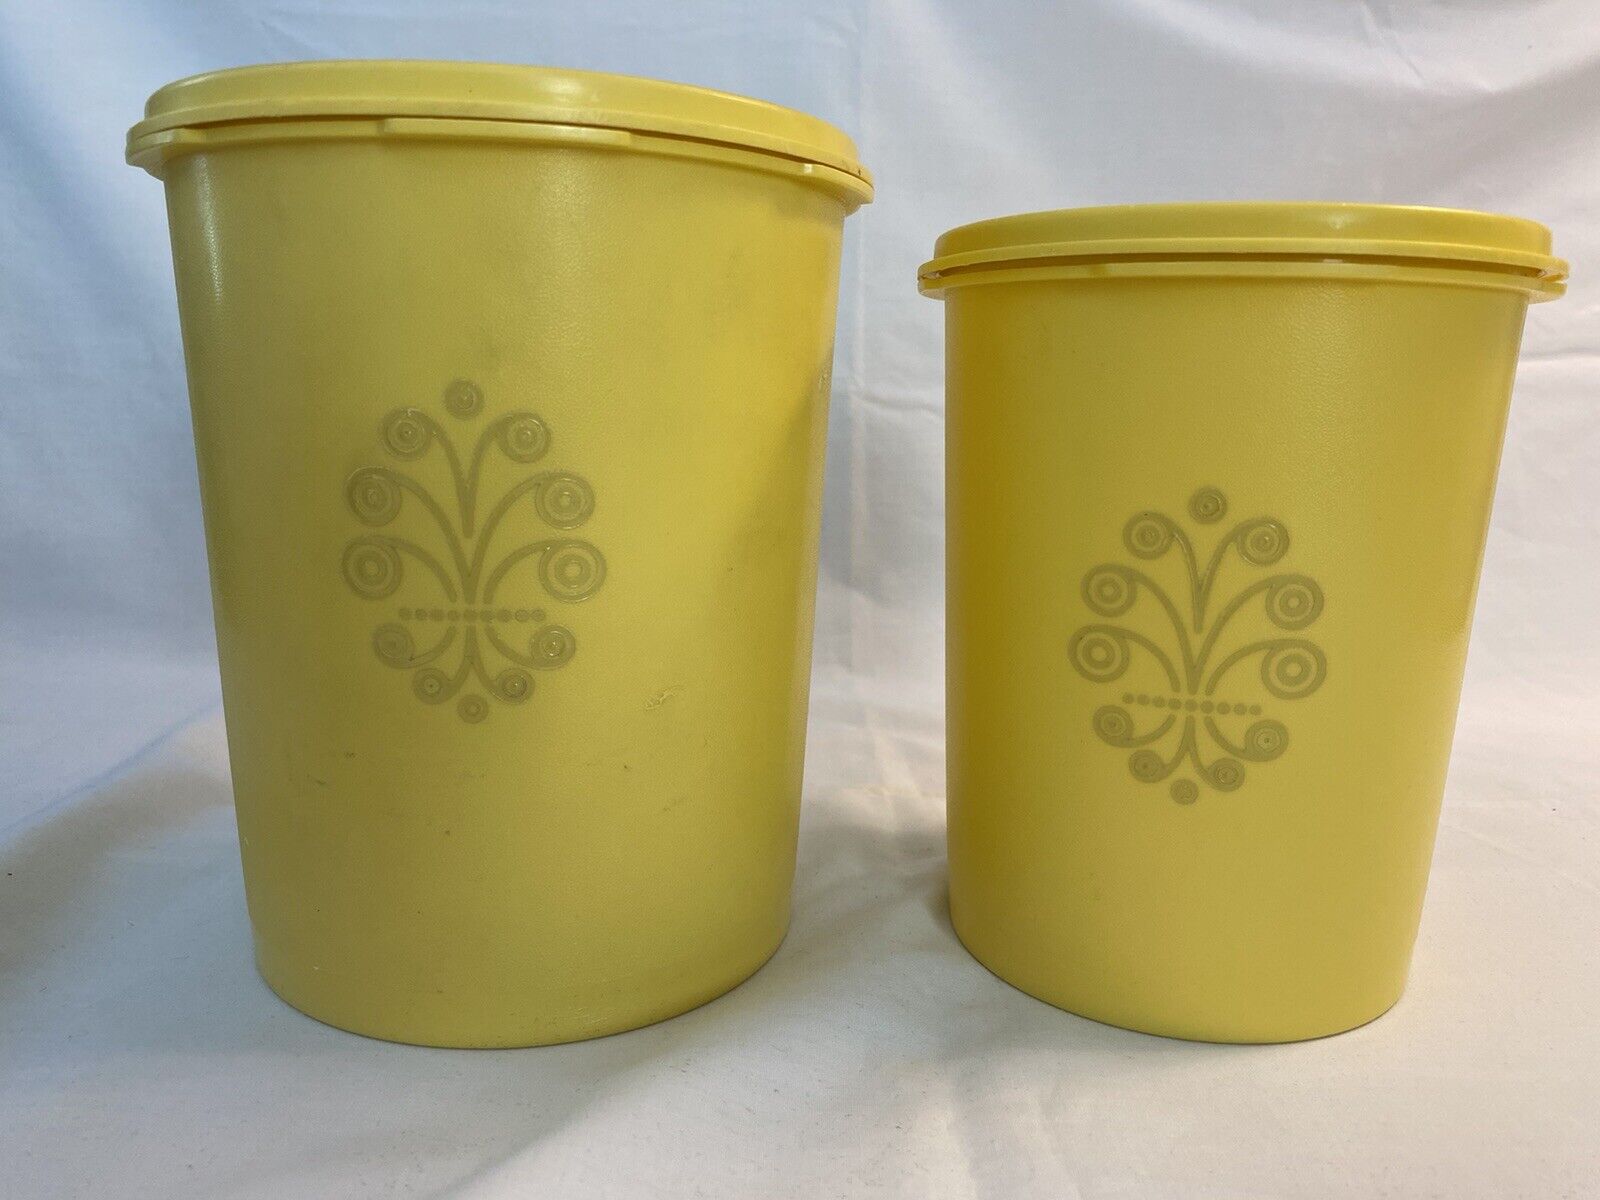 Vintage Tupperware Canister Set of 2 w/lids Retro Servalier Yellow Nesting